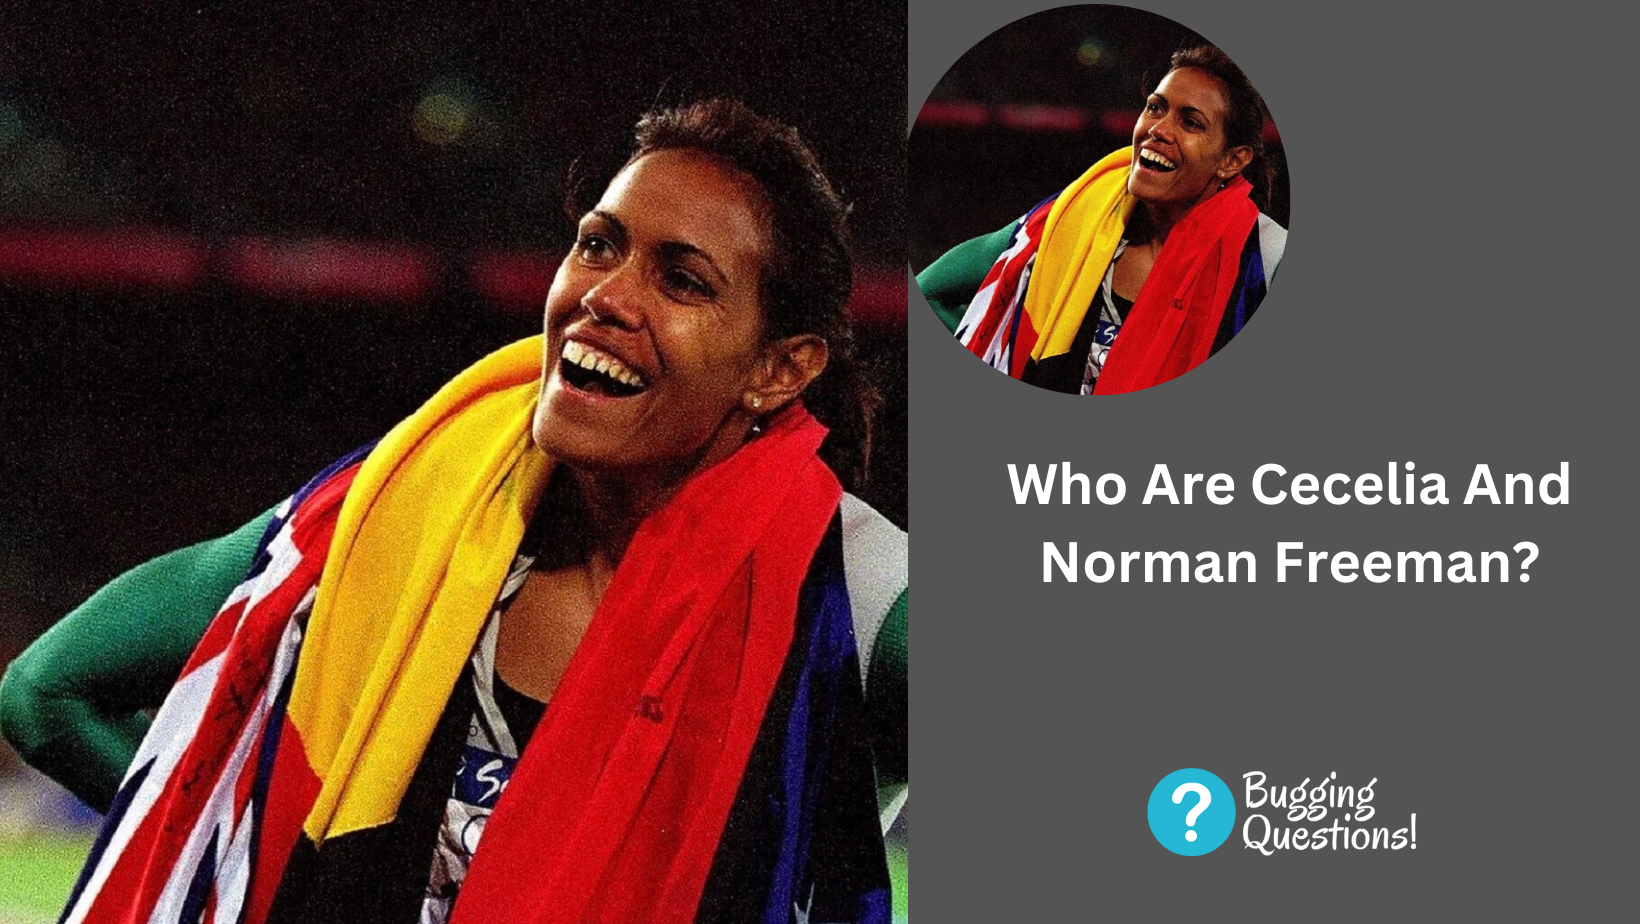 Who Are Cecelia And Norman Freeman?